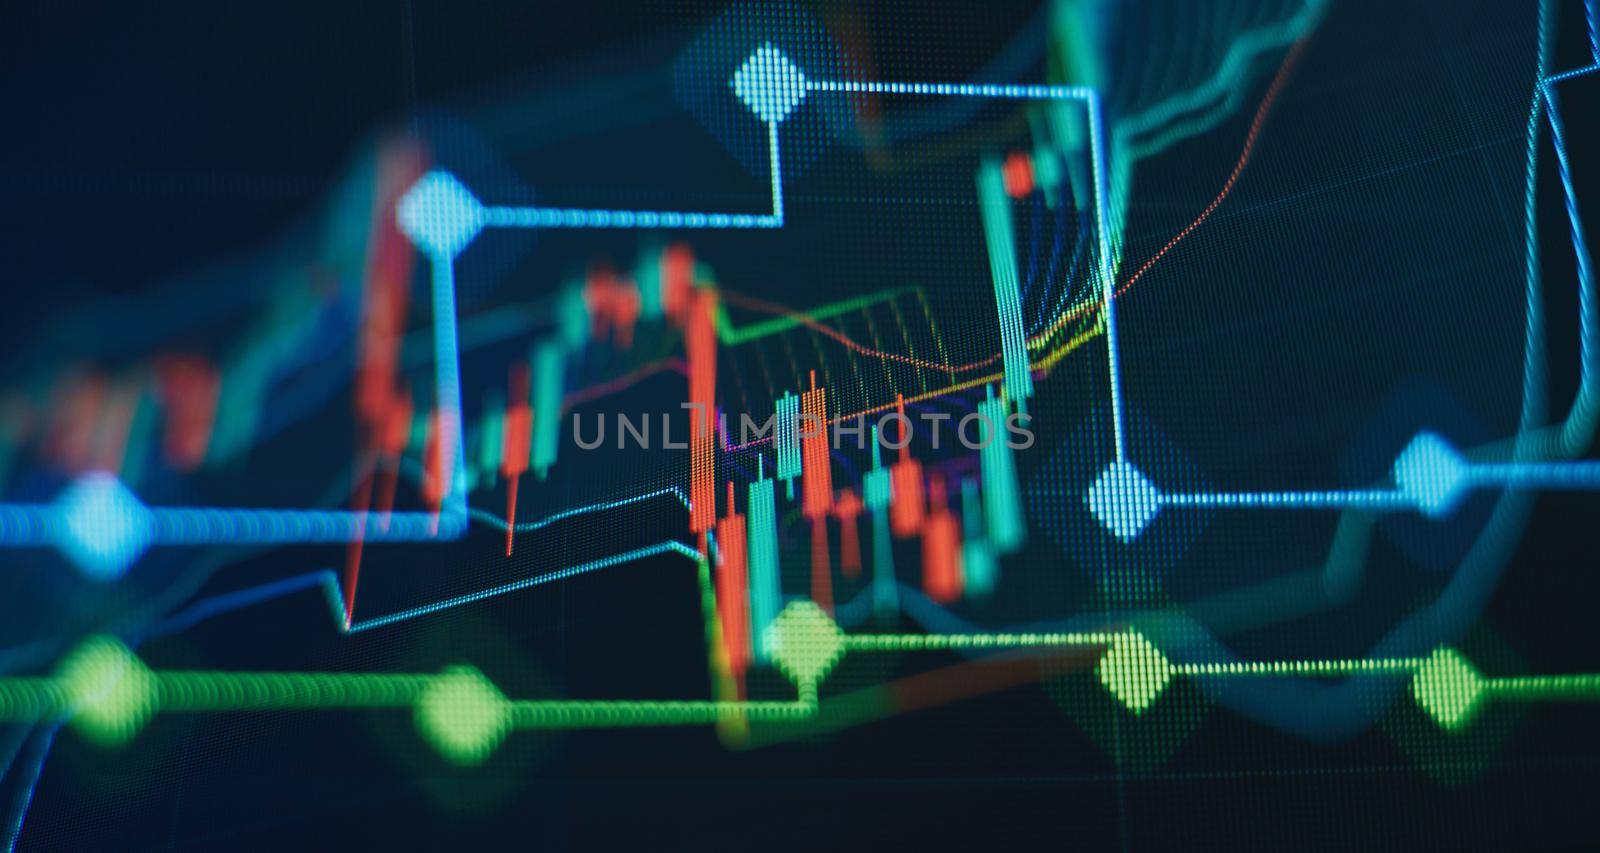 Abstract financial graph with candle stick and bar chart of stock market on financialbackground by Maximusnd